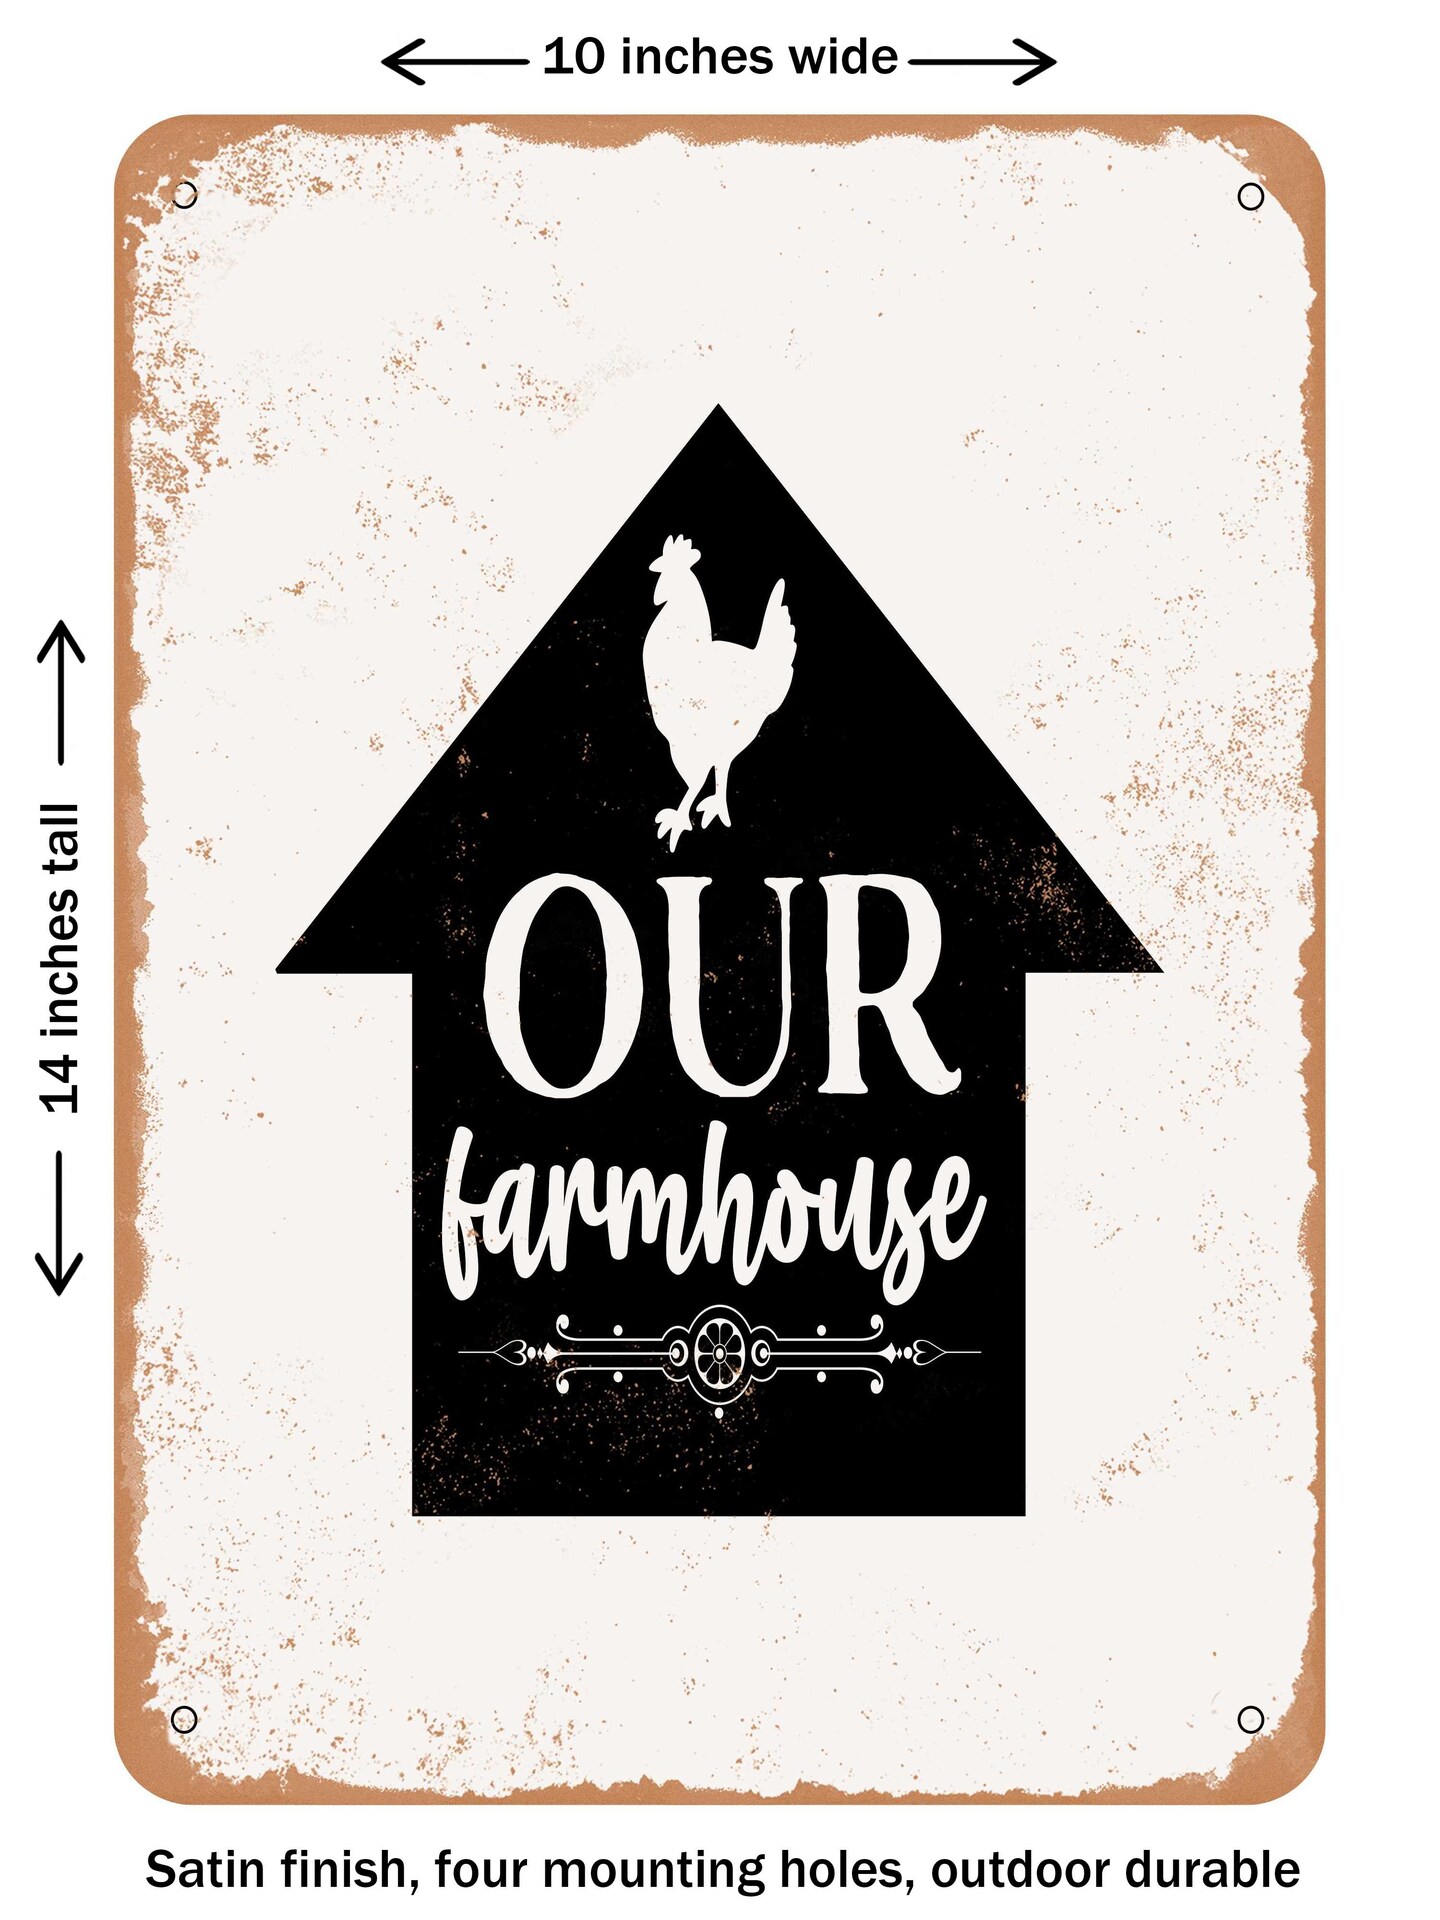 DECORATIVE METAL SIGN - Our Farmhouse - Vintage Rusty Look